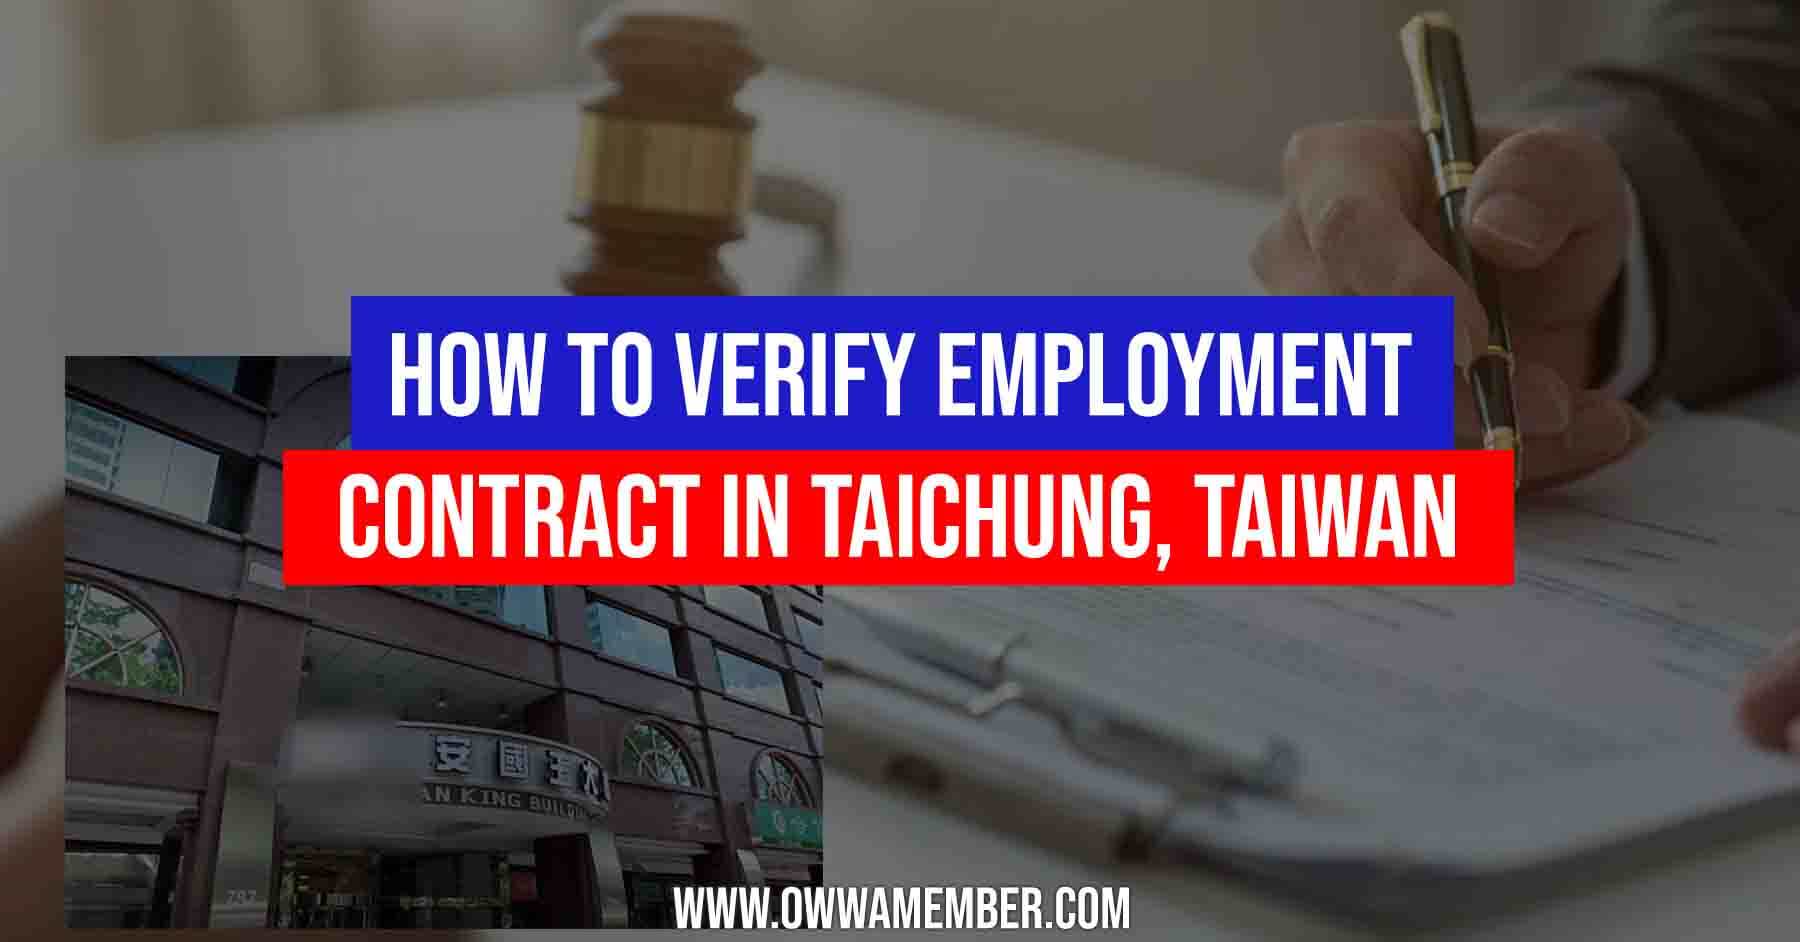 contract verification process in meco taichung taiwan